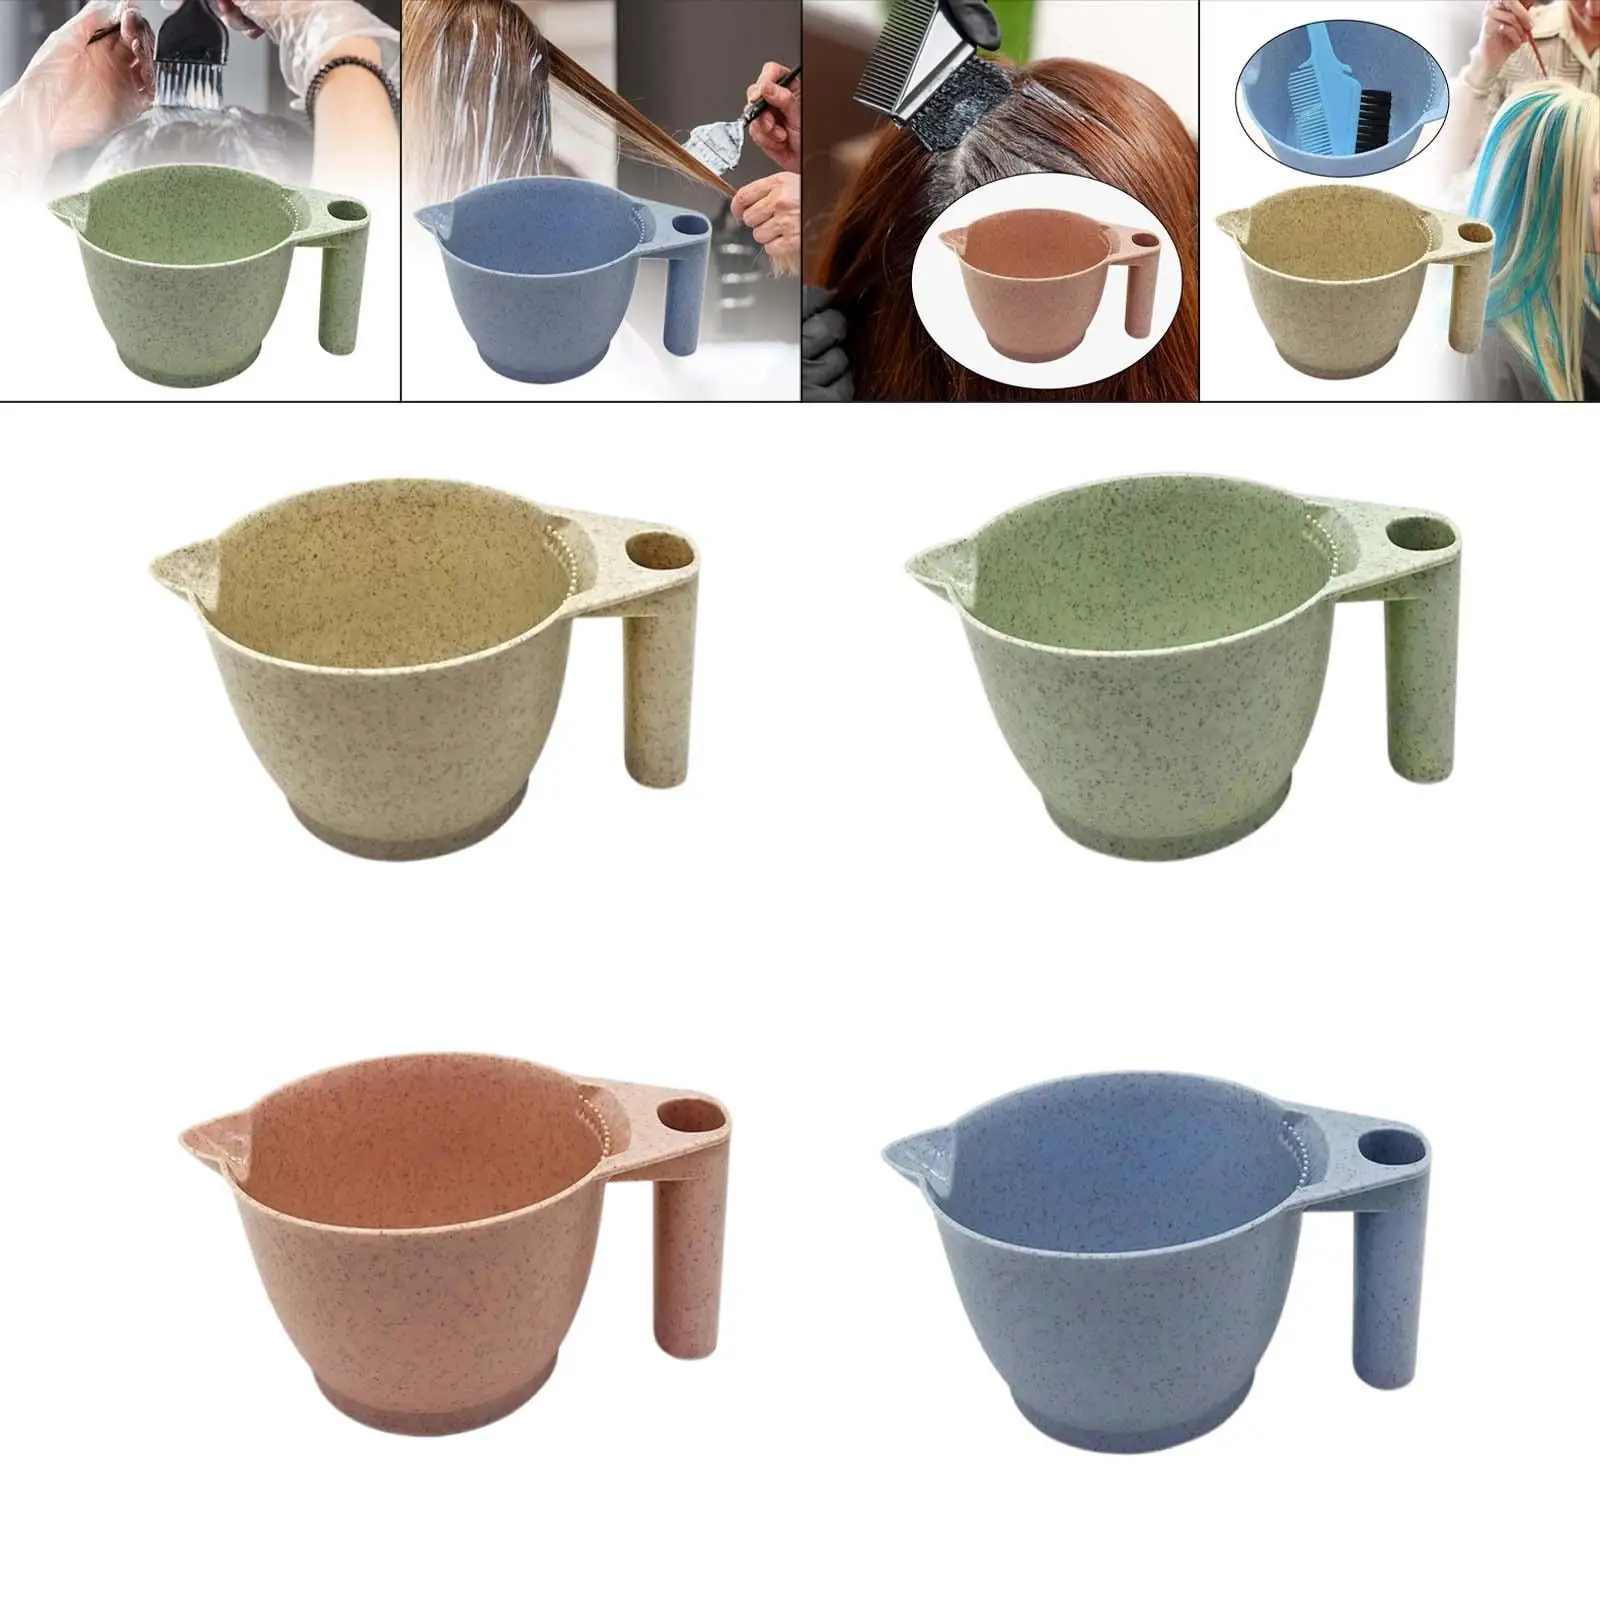 4x Hair Dye Coloring Bowl  For Hairdressing Hair Styling Salon